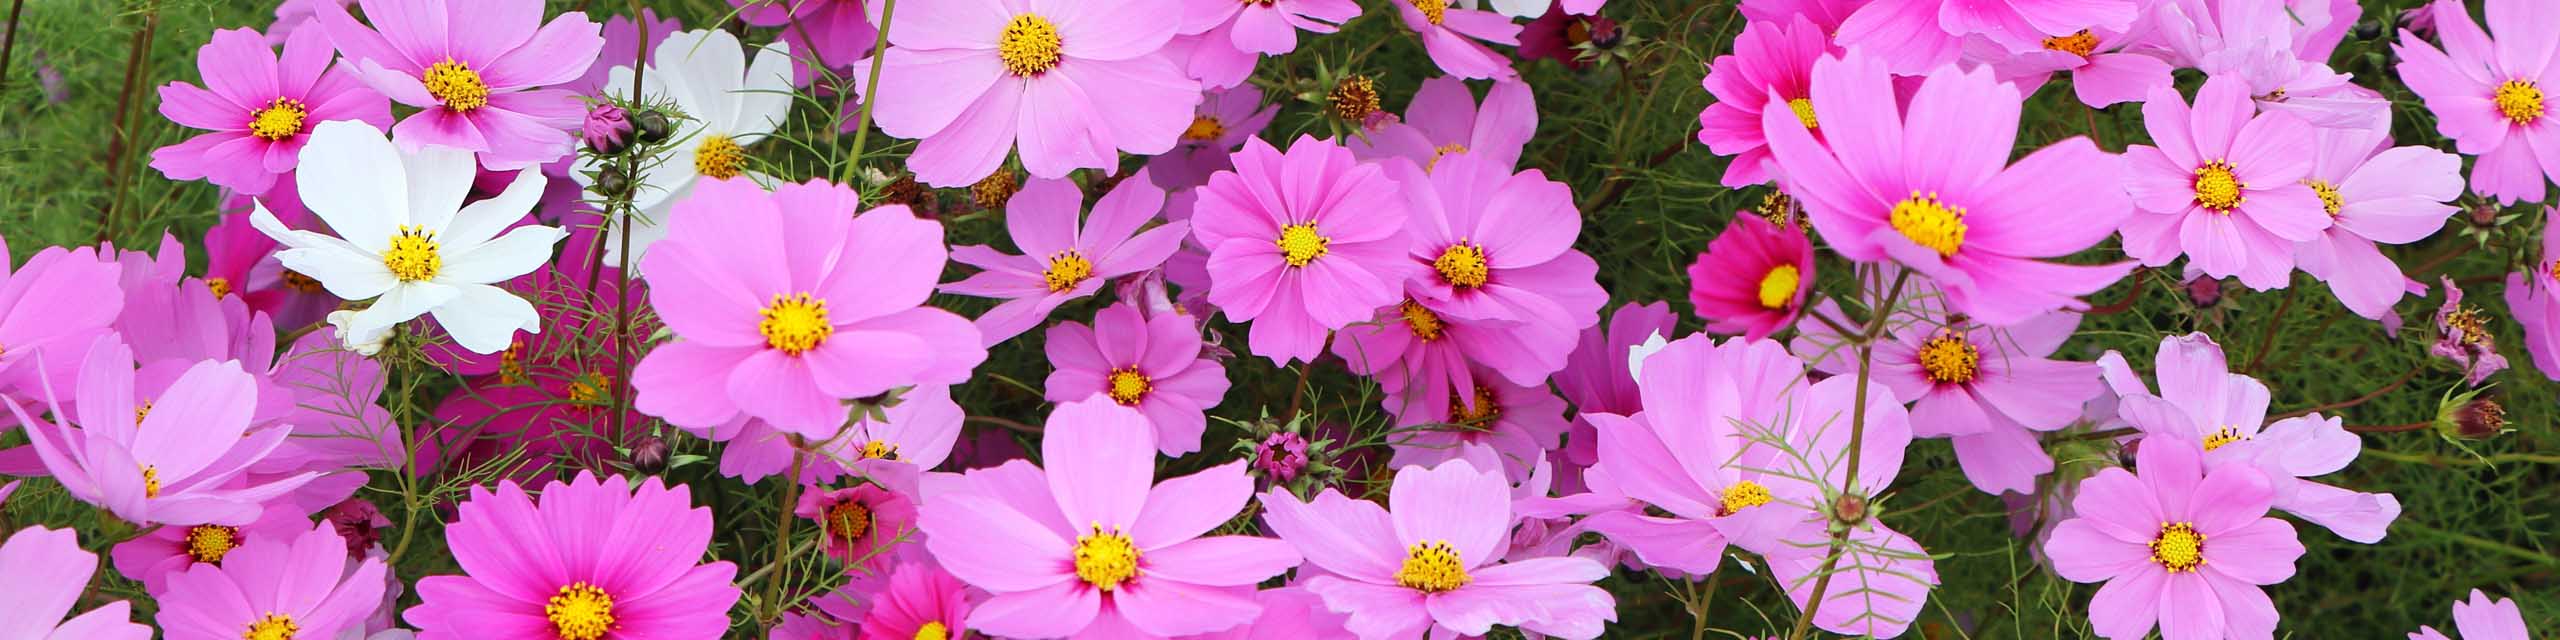 Pink, red, and white cosmos flowers in bloom.